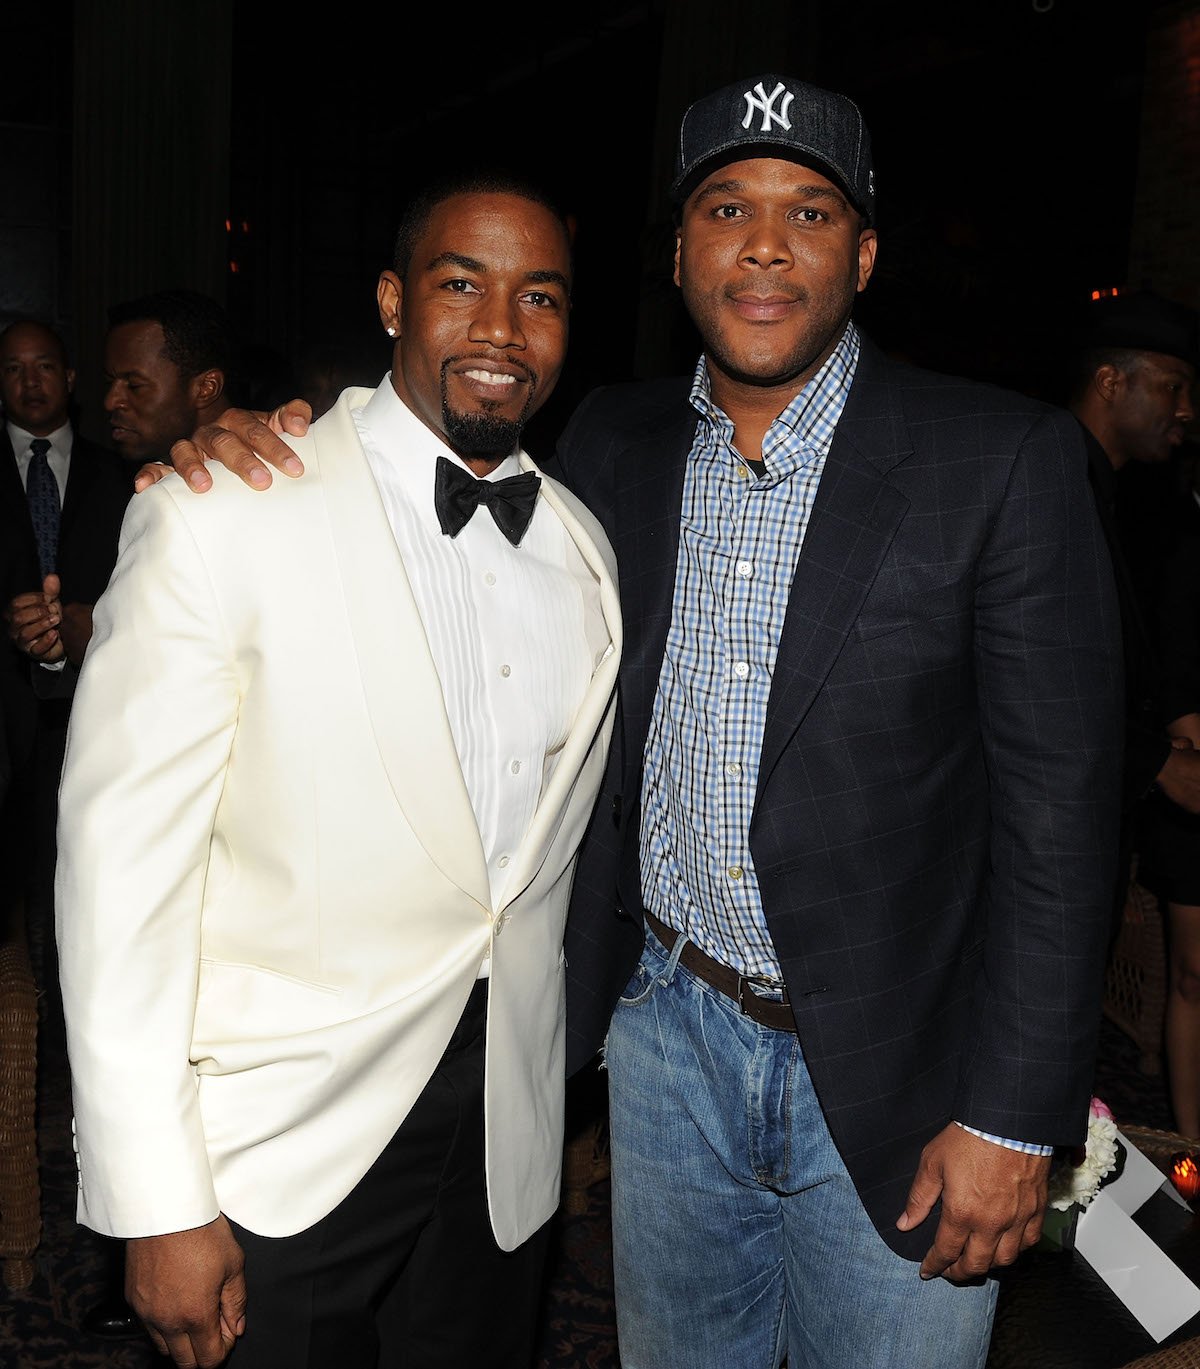 Michael Jai White and Tyler Perry